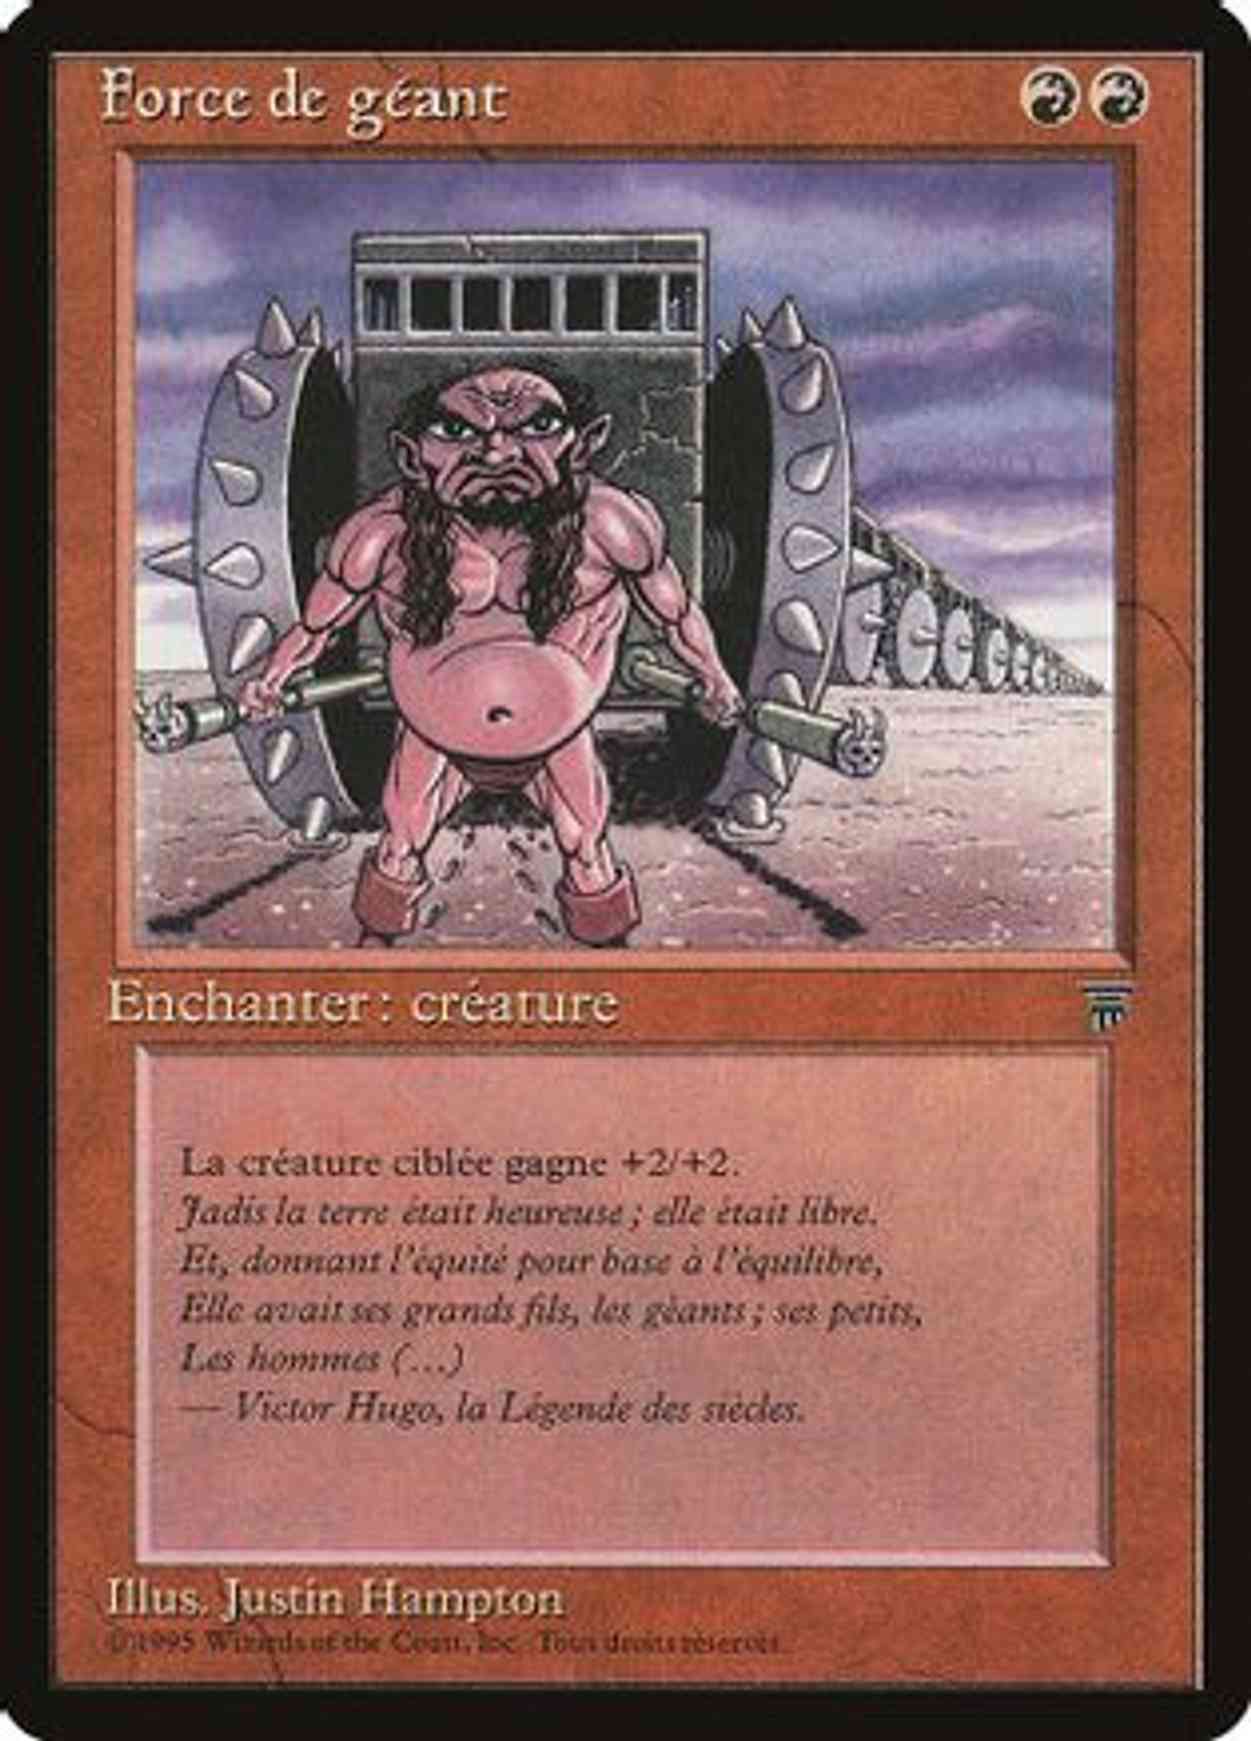 Giant Strength (French) - "Force de geant" magic card front